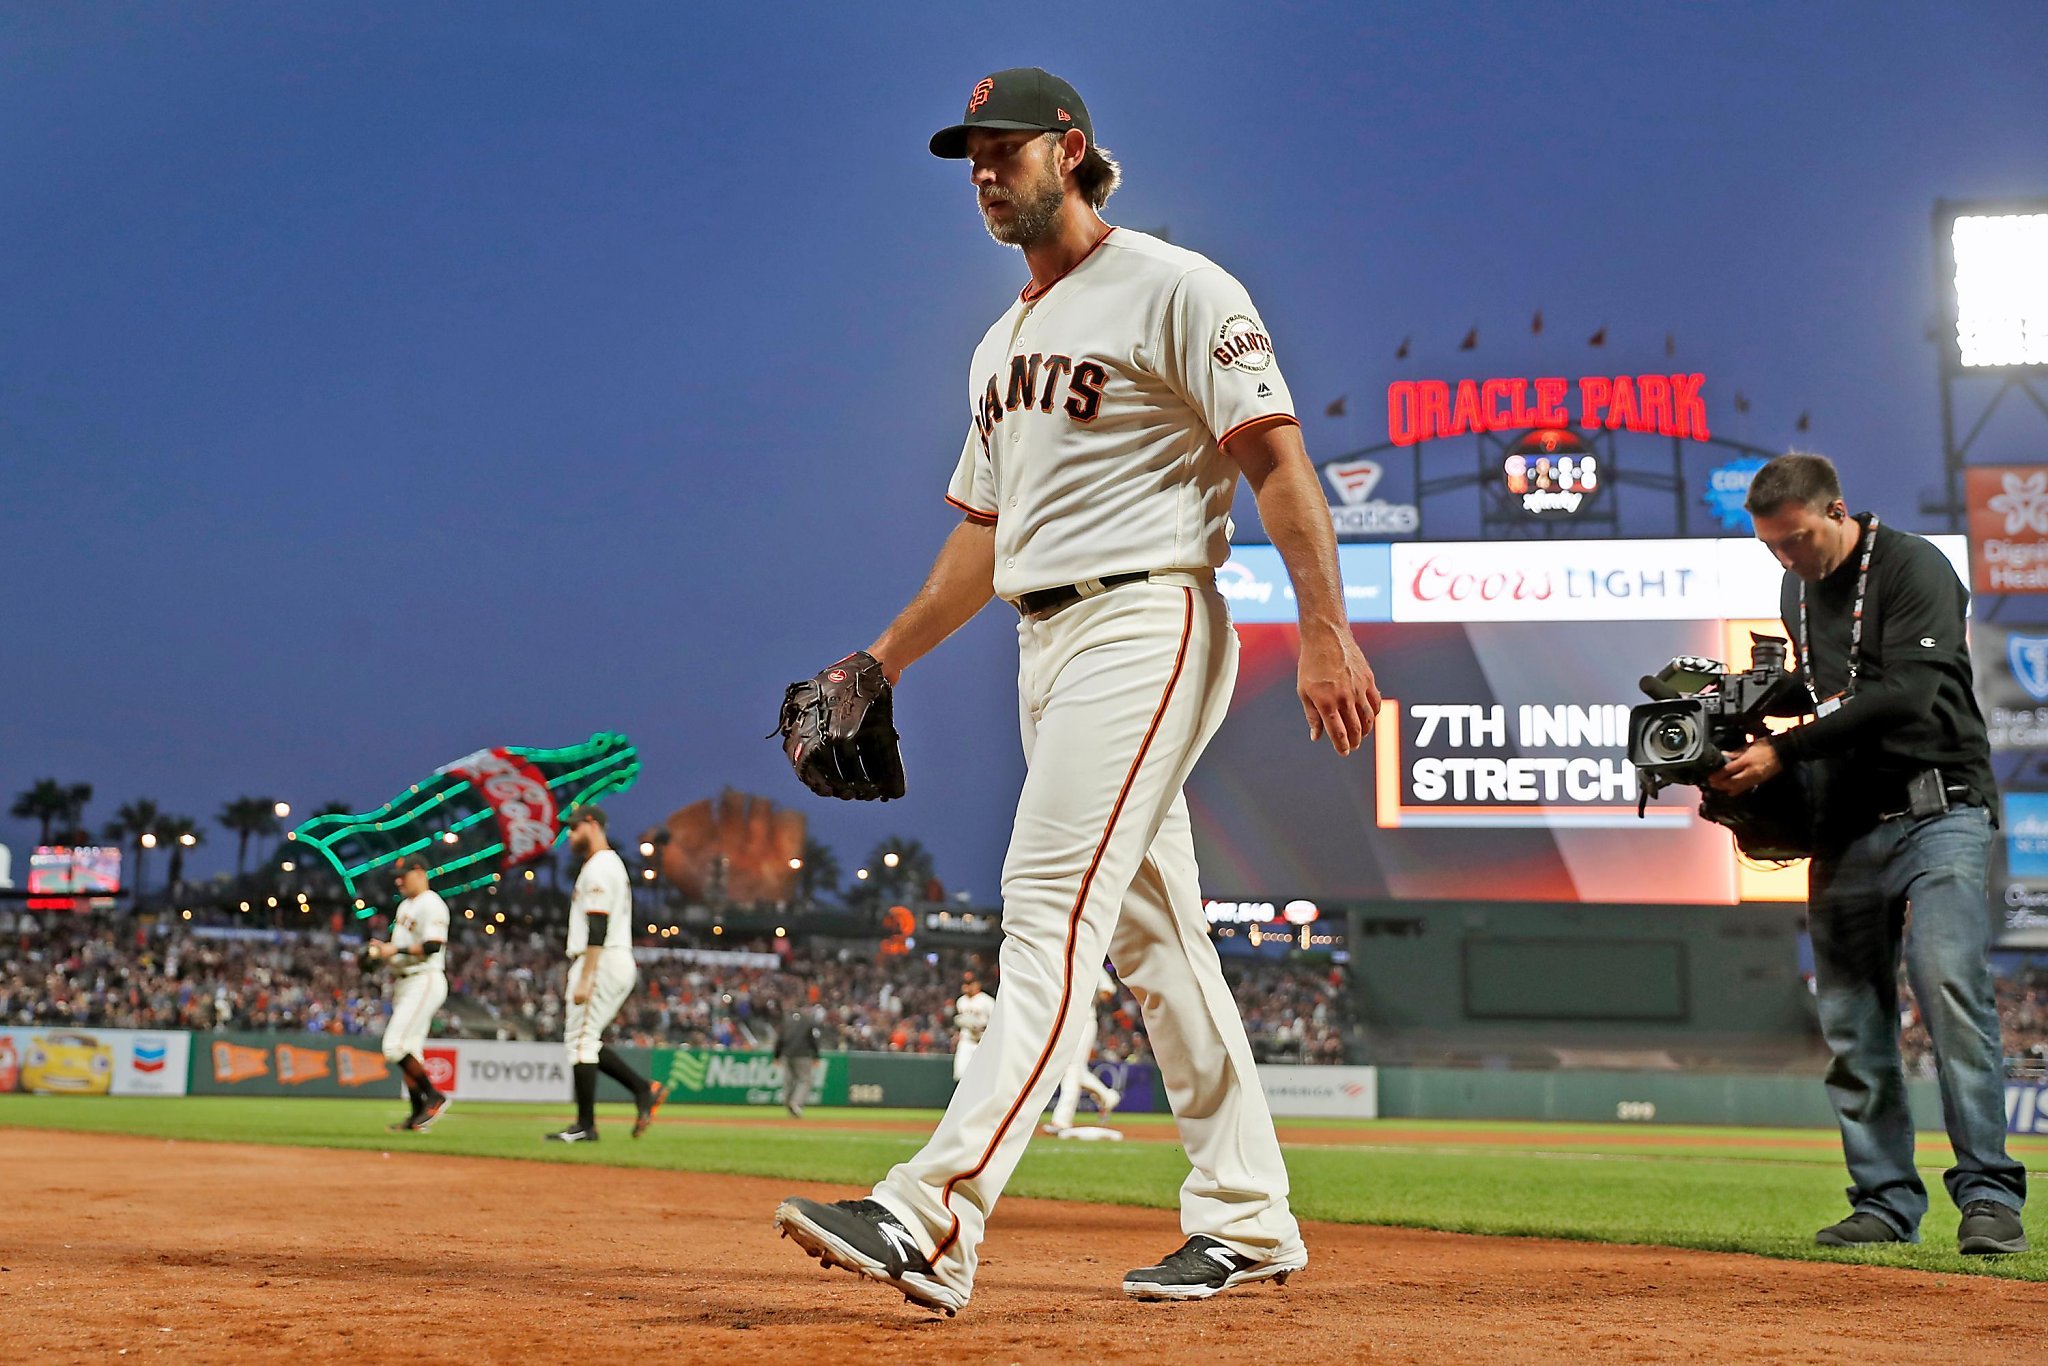 Madison Bumgarner Stands on Mound Looking Editorial Image - Image